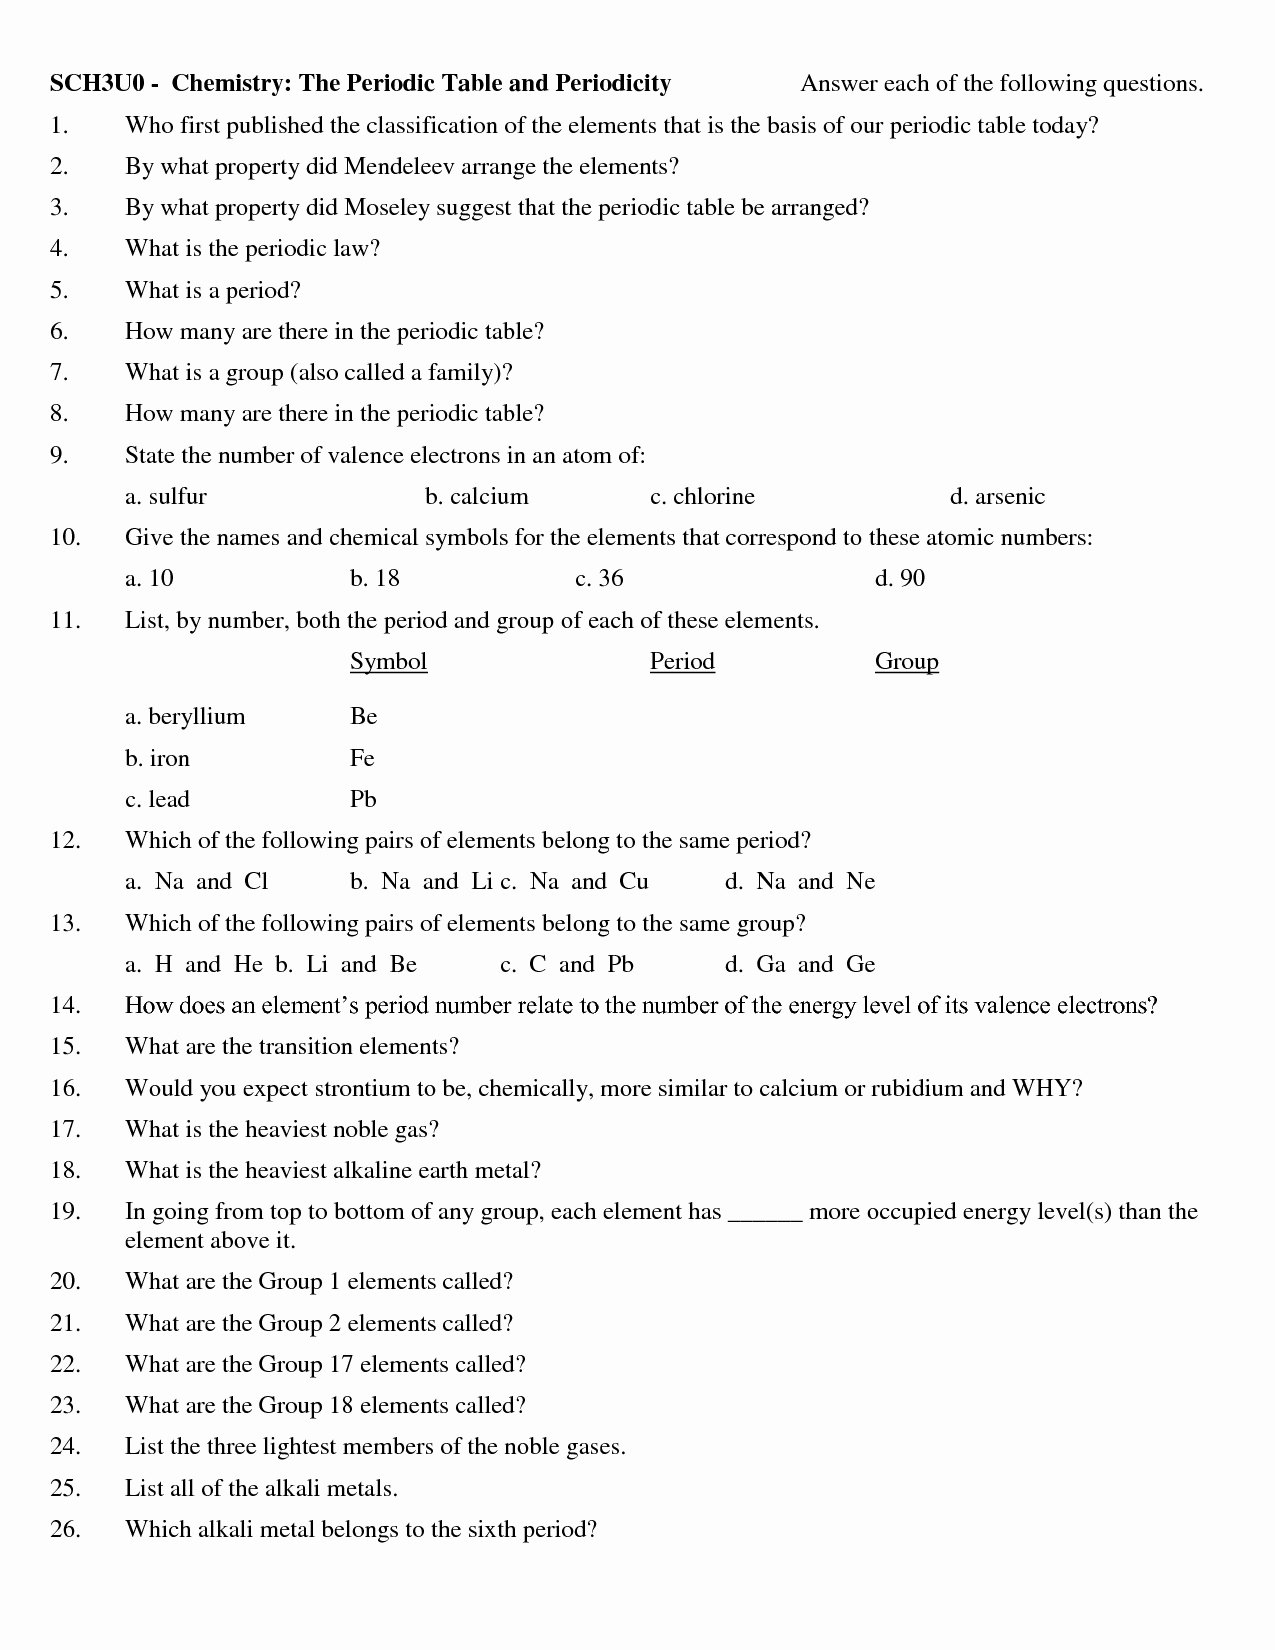 Periodic Trends Worksheet Answers Fresh 20 Best Of Periodic Trends Worksheet Answers Key